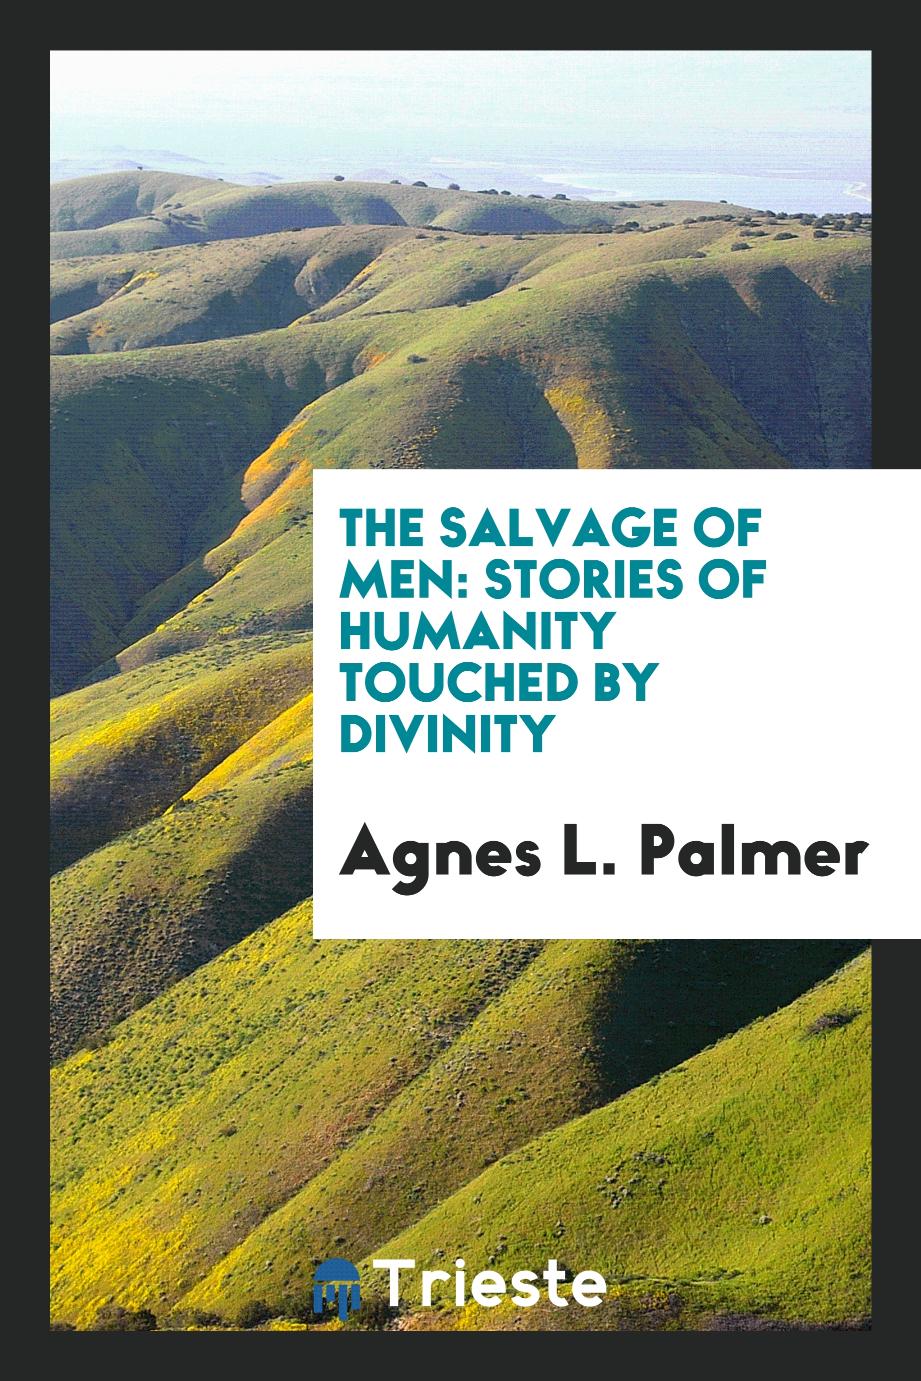 The Salvage of Men: Stories of Humanity Touched by Divinity